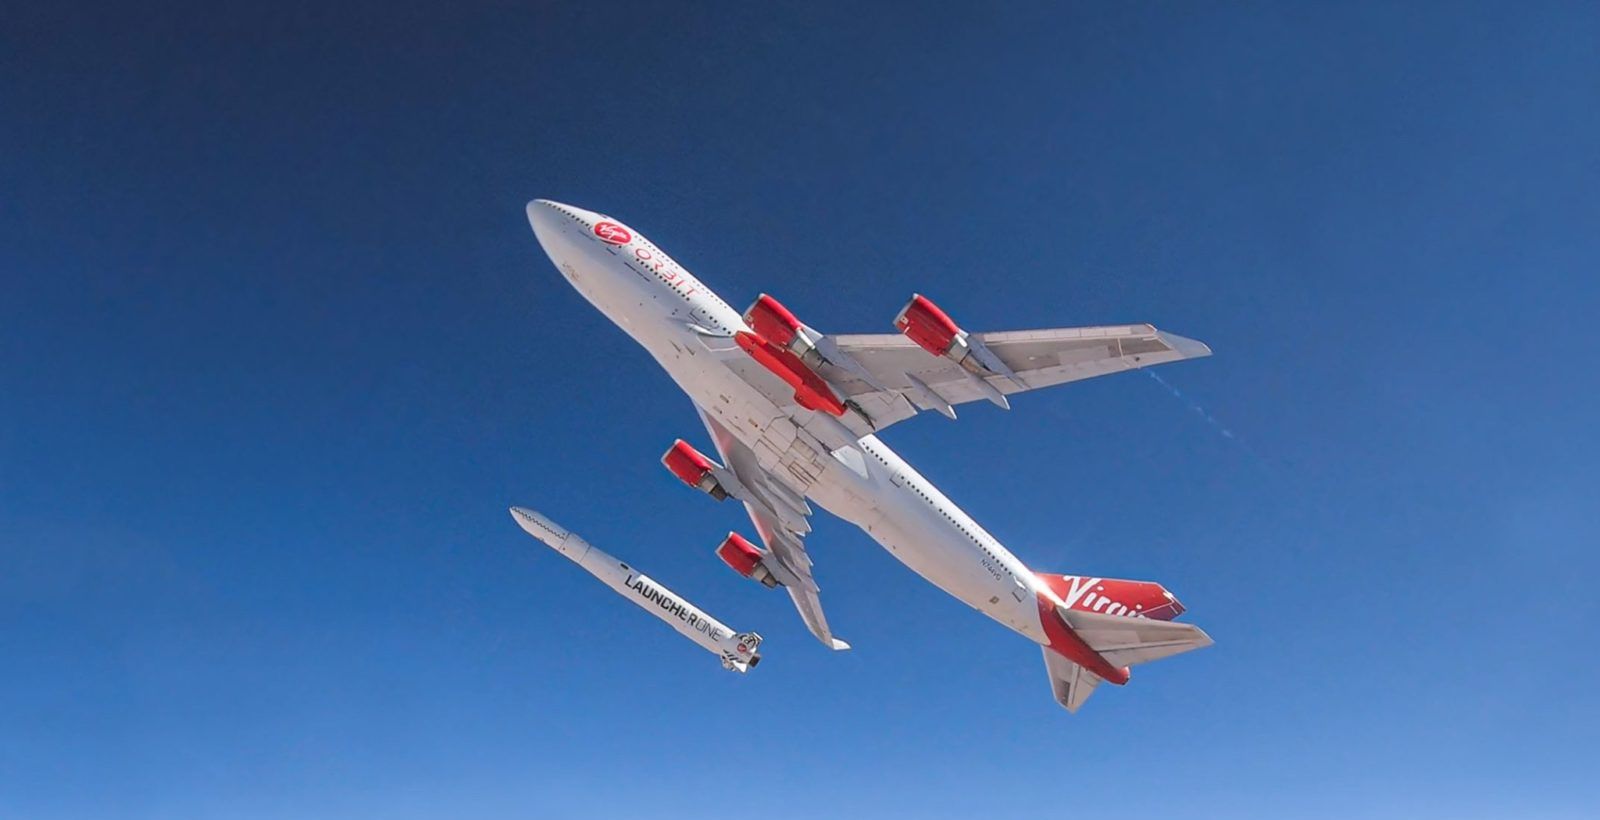 The Virgin Orbit reaches space, paving the way for low-cost space travel